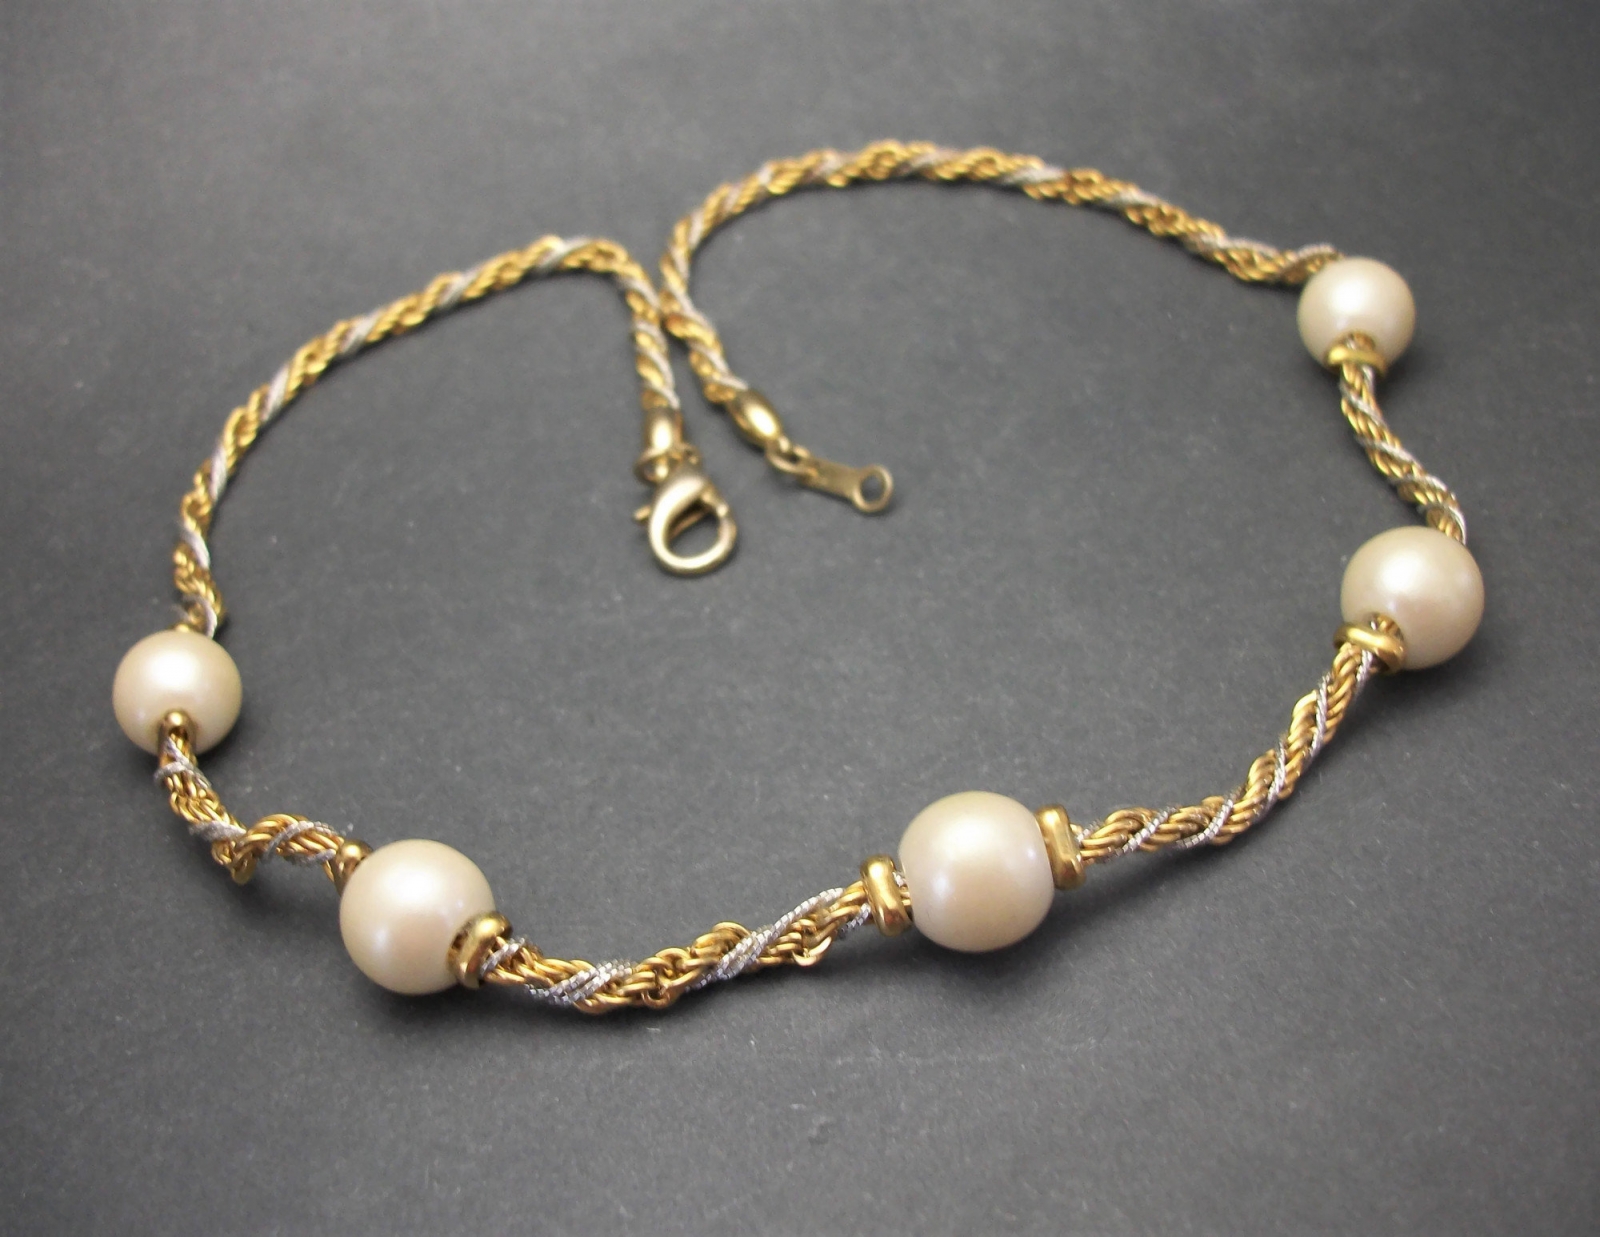 Vintage Rope Chain Twist Necklace with Faux Pearls 17 inch Mixed Metal ...